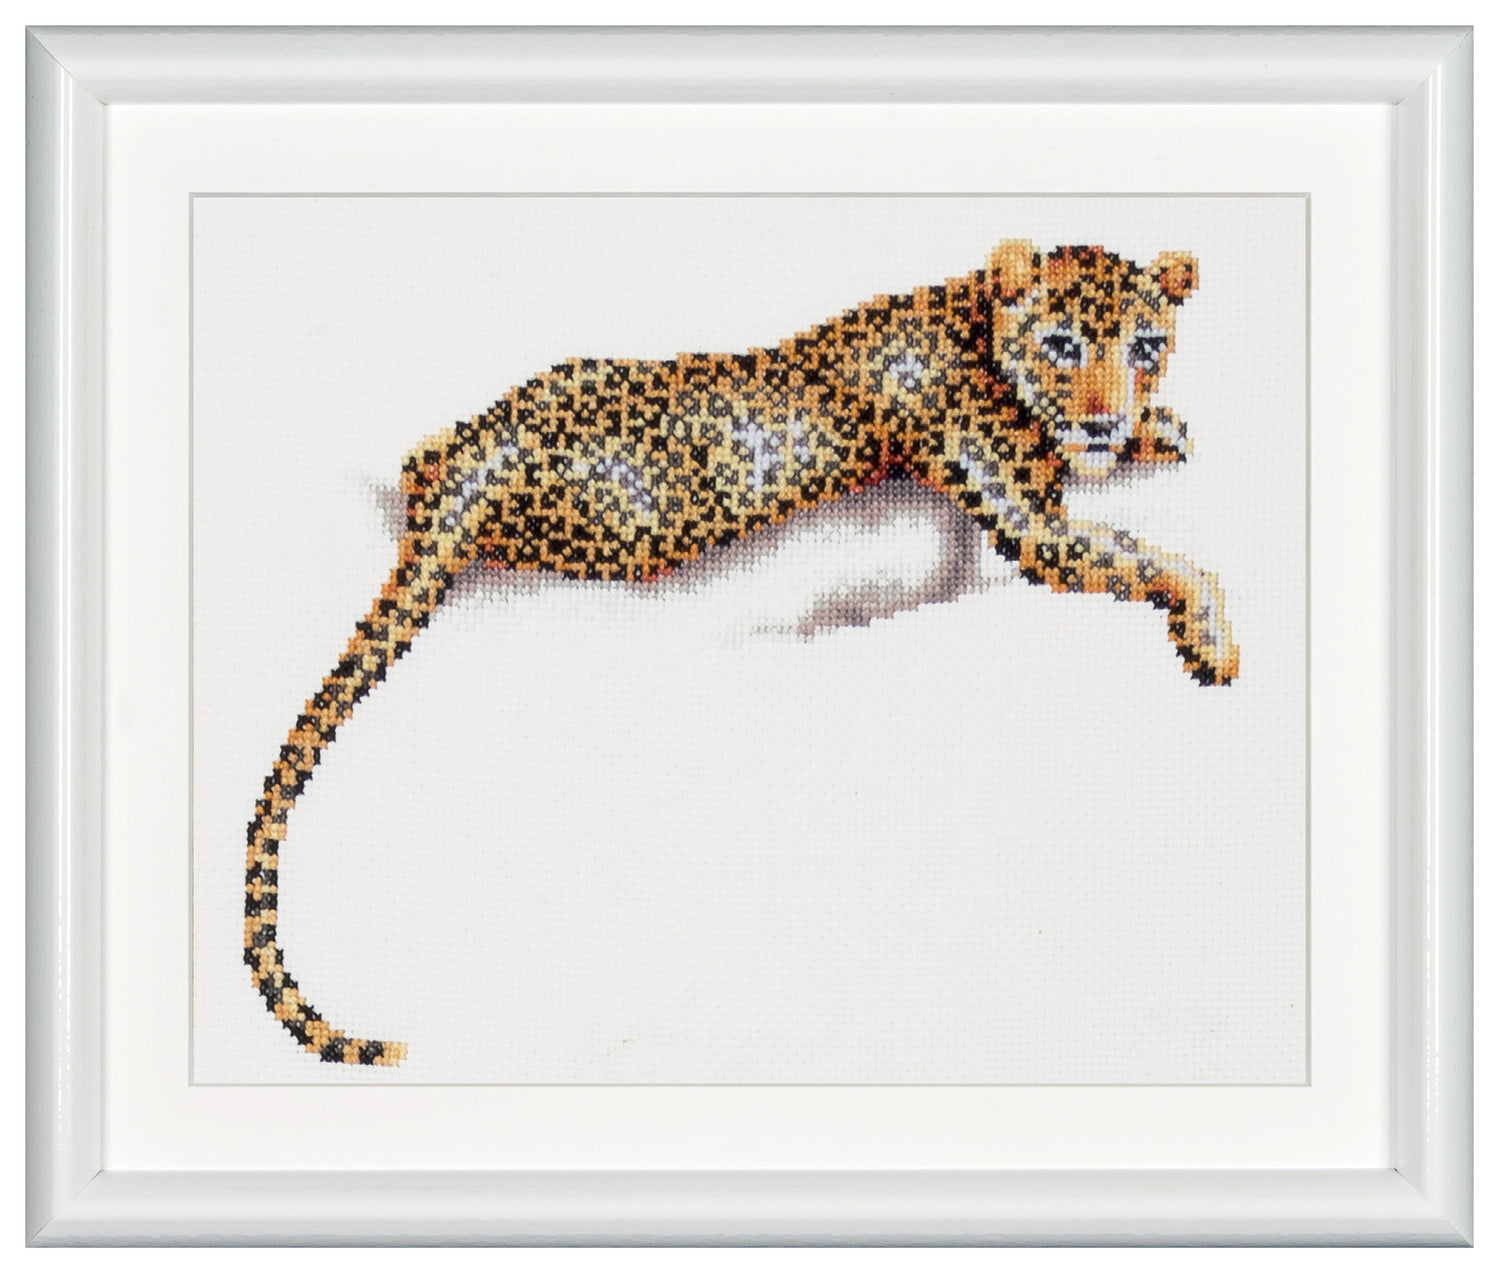 If you are fascinated with the wildlife and want to step up your embroidery skills, pick this leopard cross-stitch kit. An intricate design capturing the fur details of the baby leopard with it's innocent facial expression, adorable. DSB cross stitch kits have easy to follow design charts and contain all items needed to facilitate embroidery without hassle. To cater to both beginners as well as advanced stitching artists.